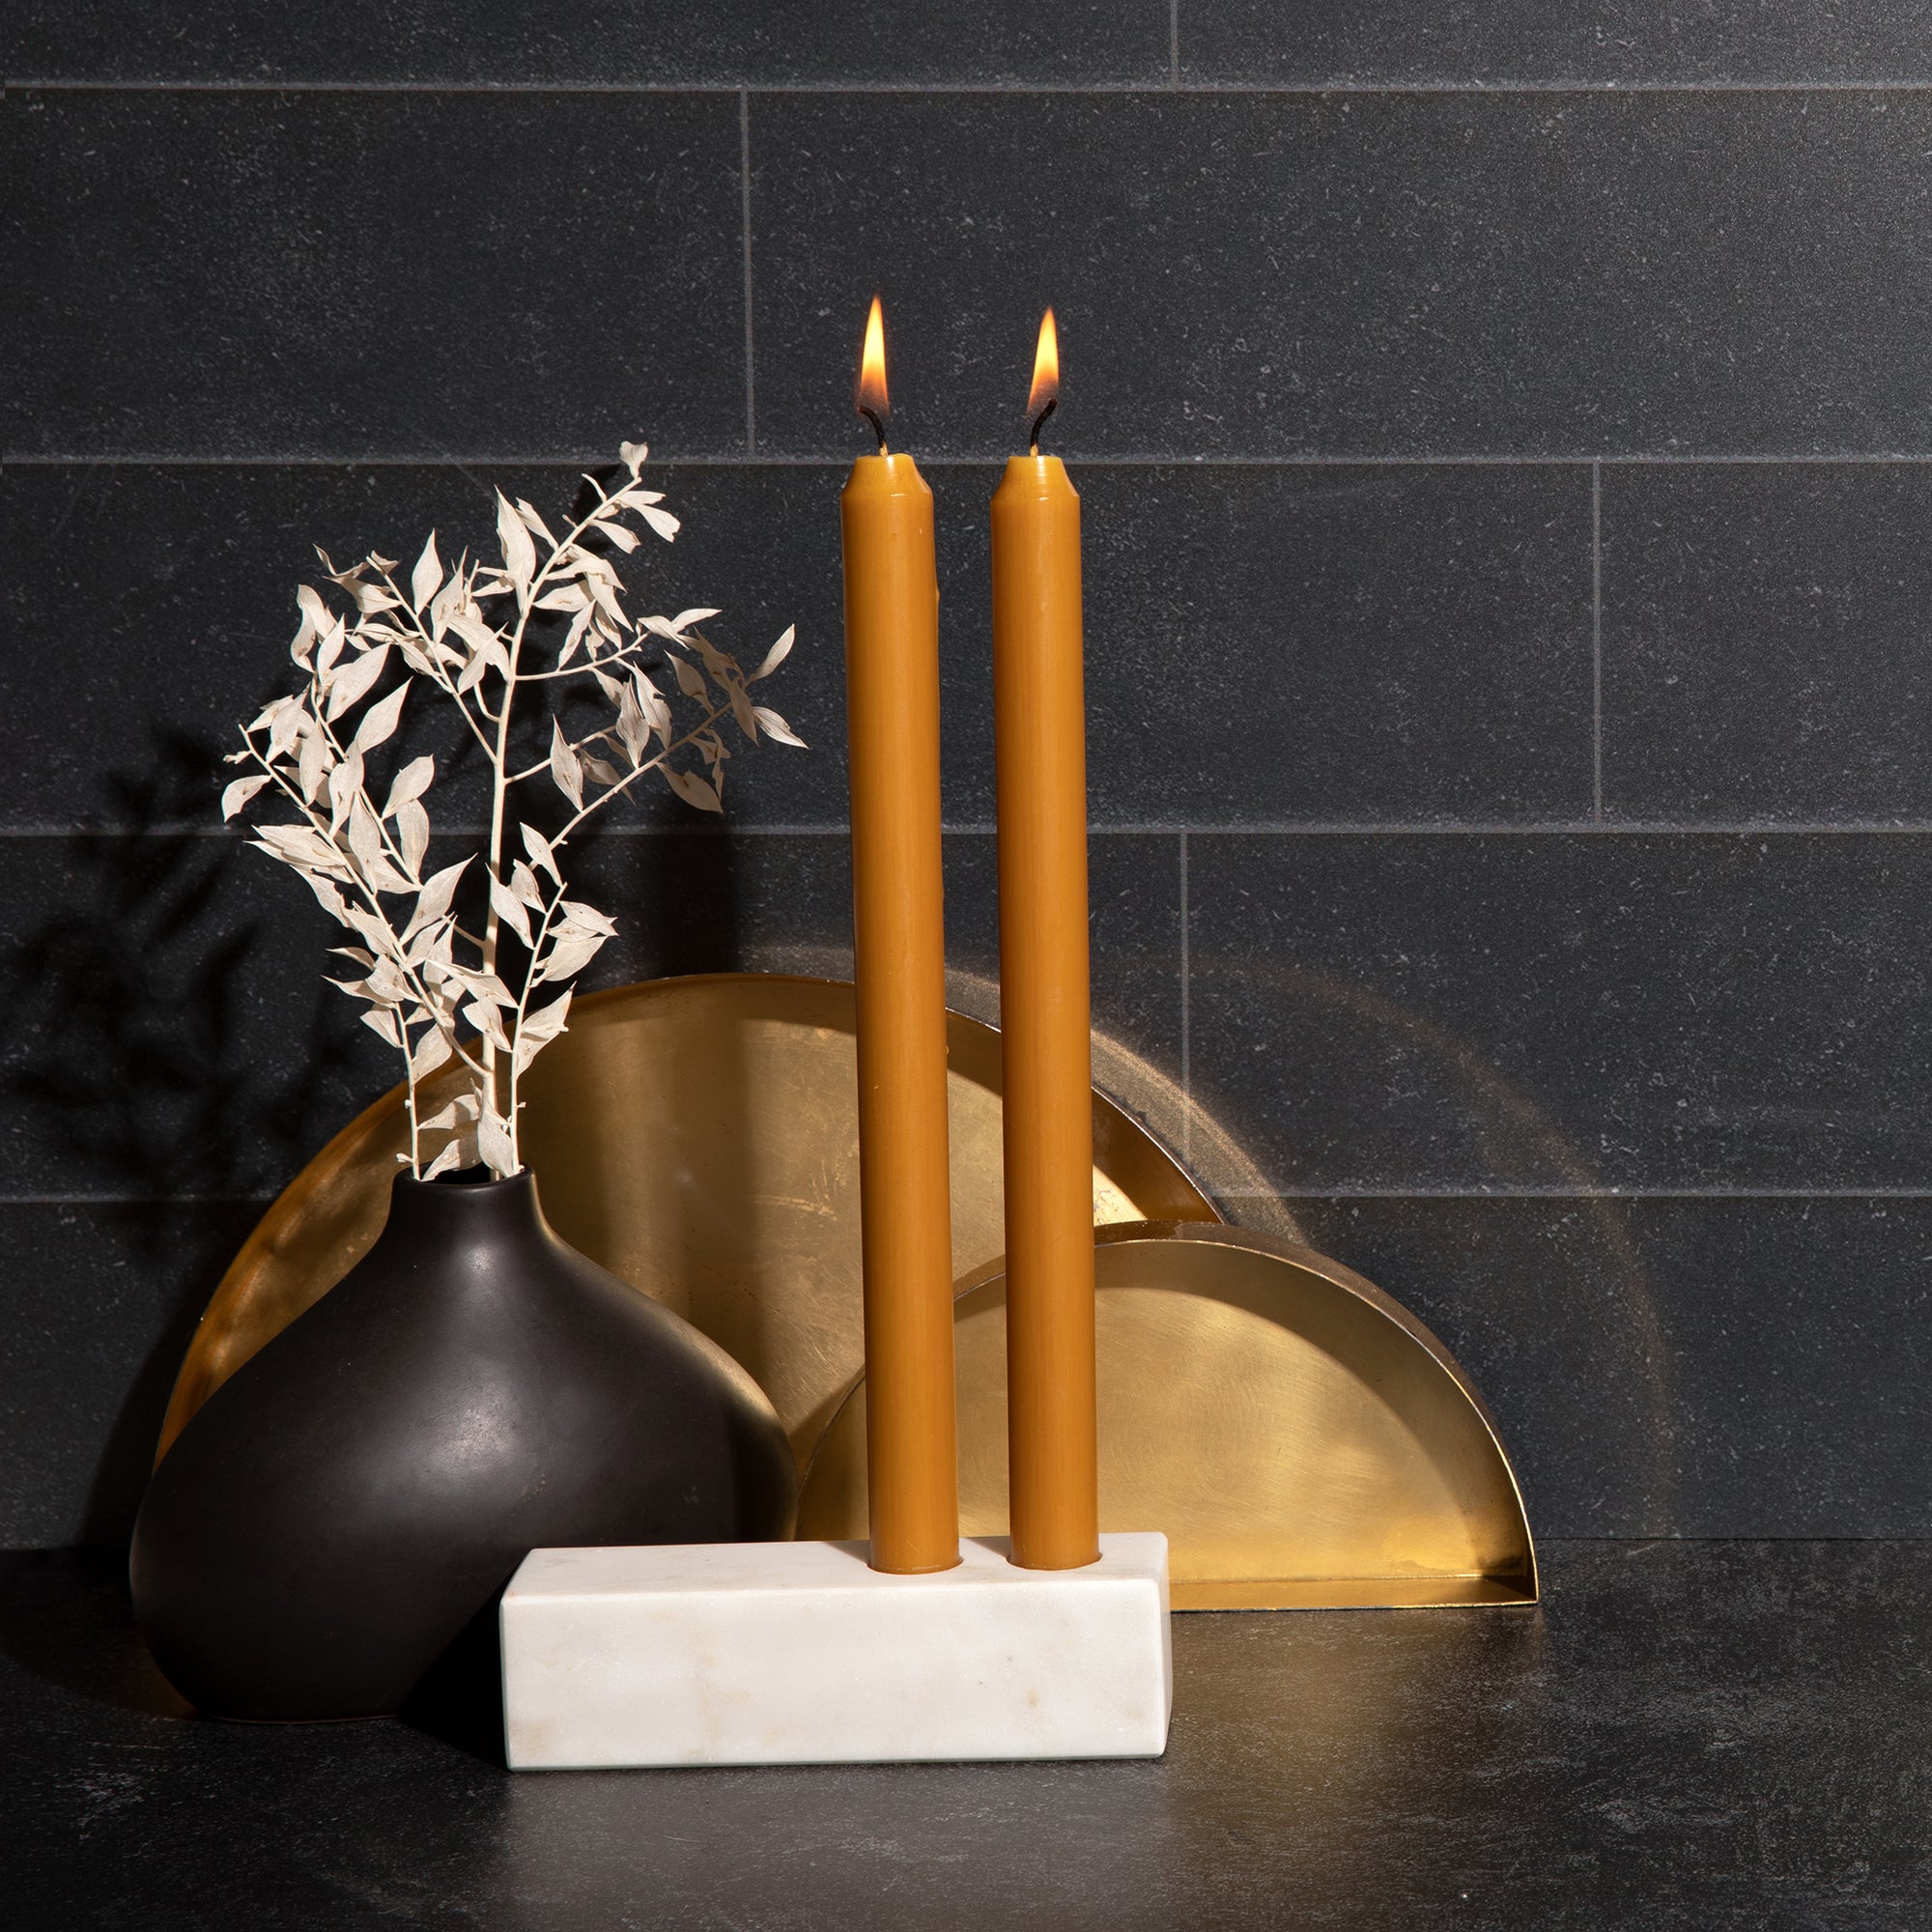 Asymmetrical marble double taper candleholder with harvest gold